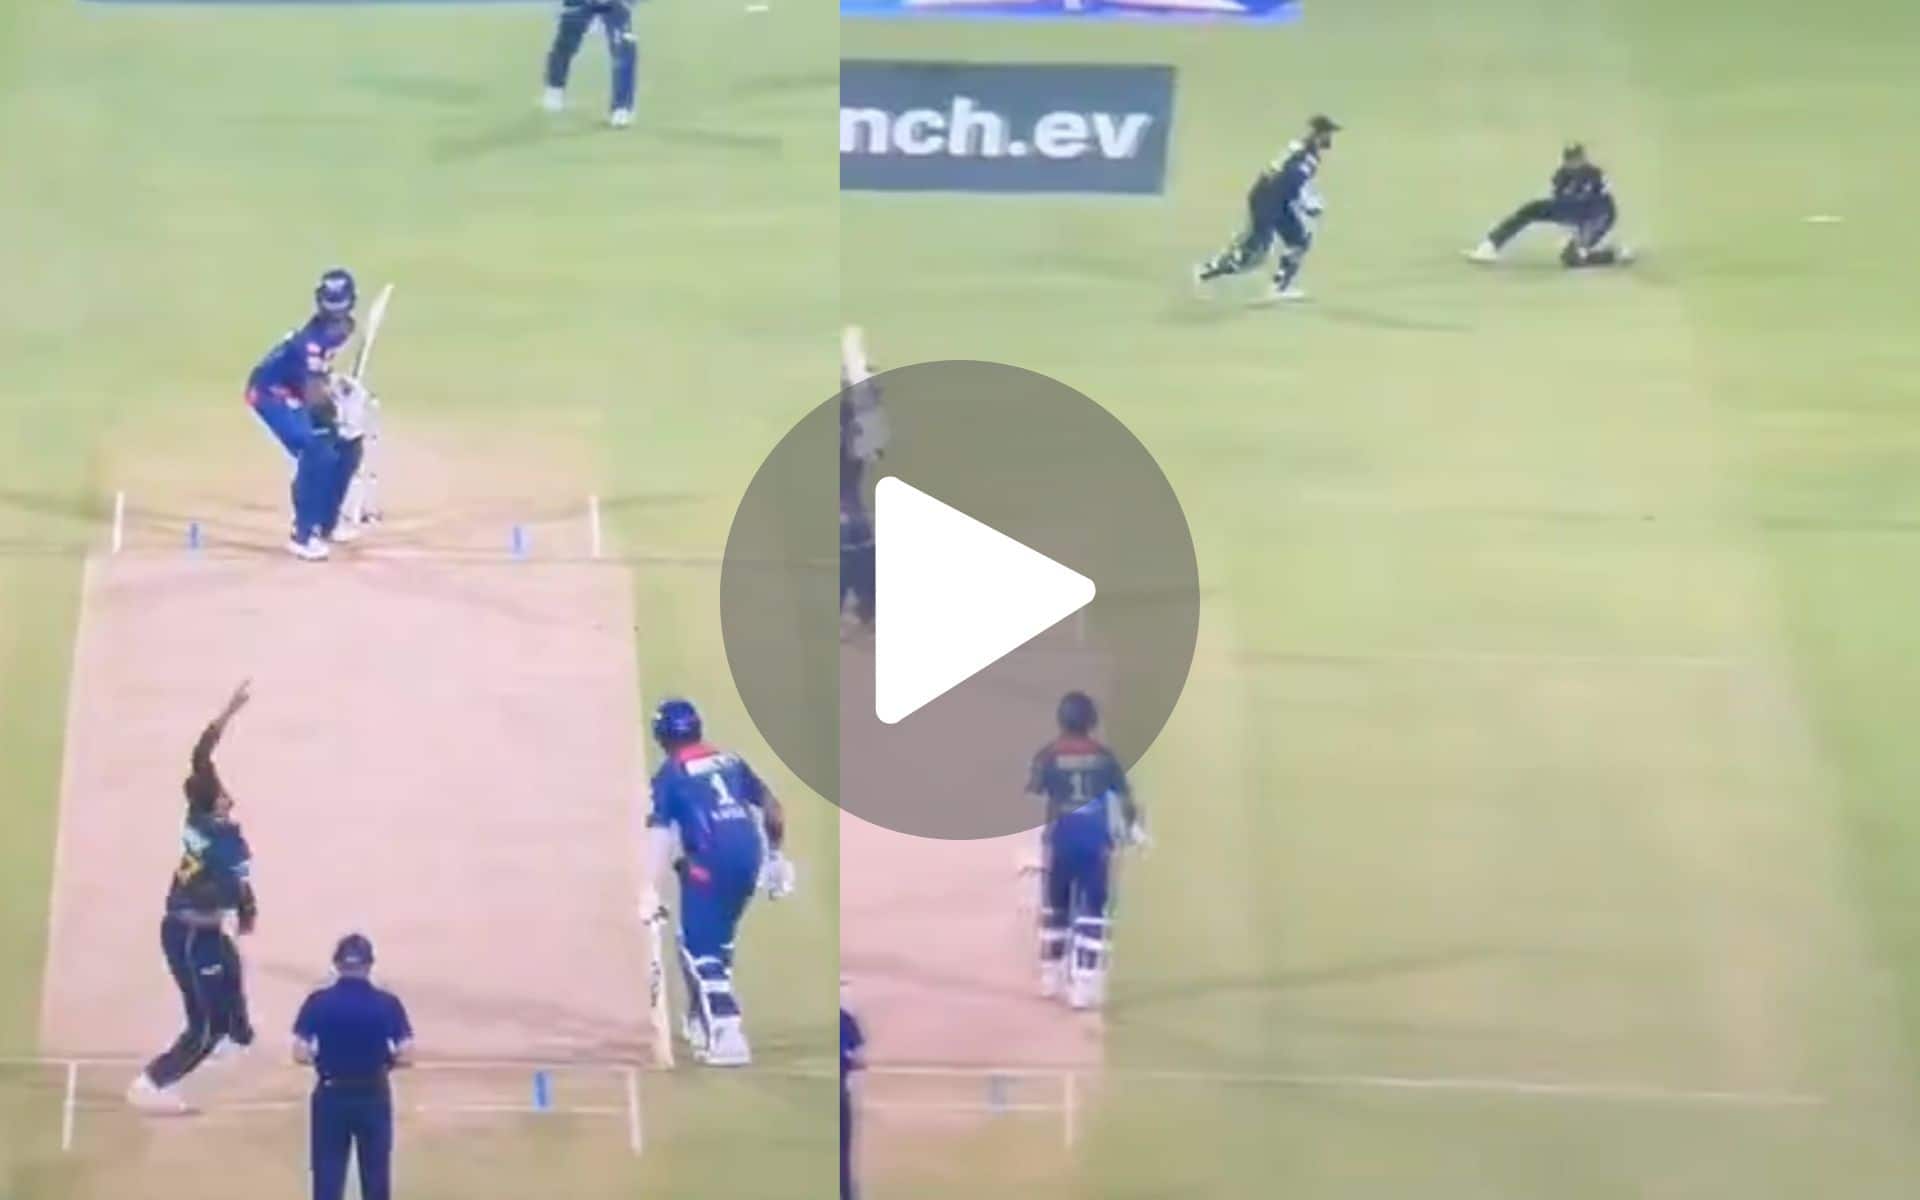 [Watch] Devdutt Padikkal Faces The Wrath Of Umesh Yadav! Sends Him Packing With Sheer Pace